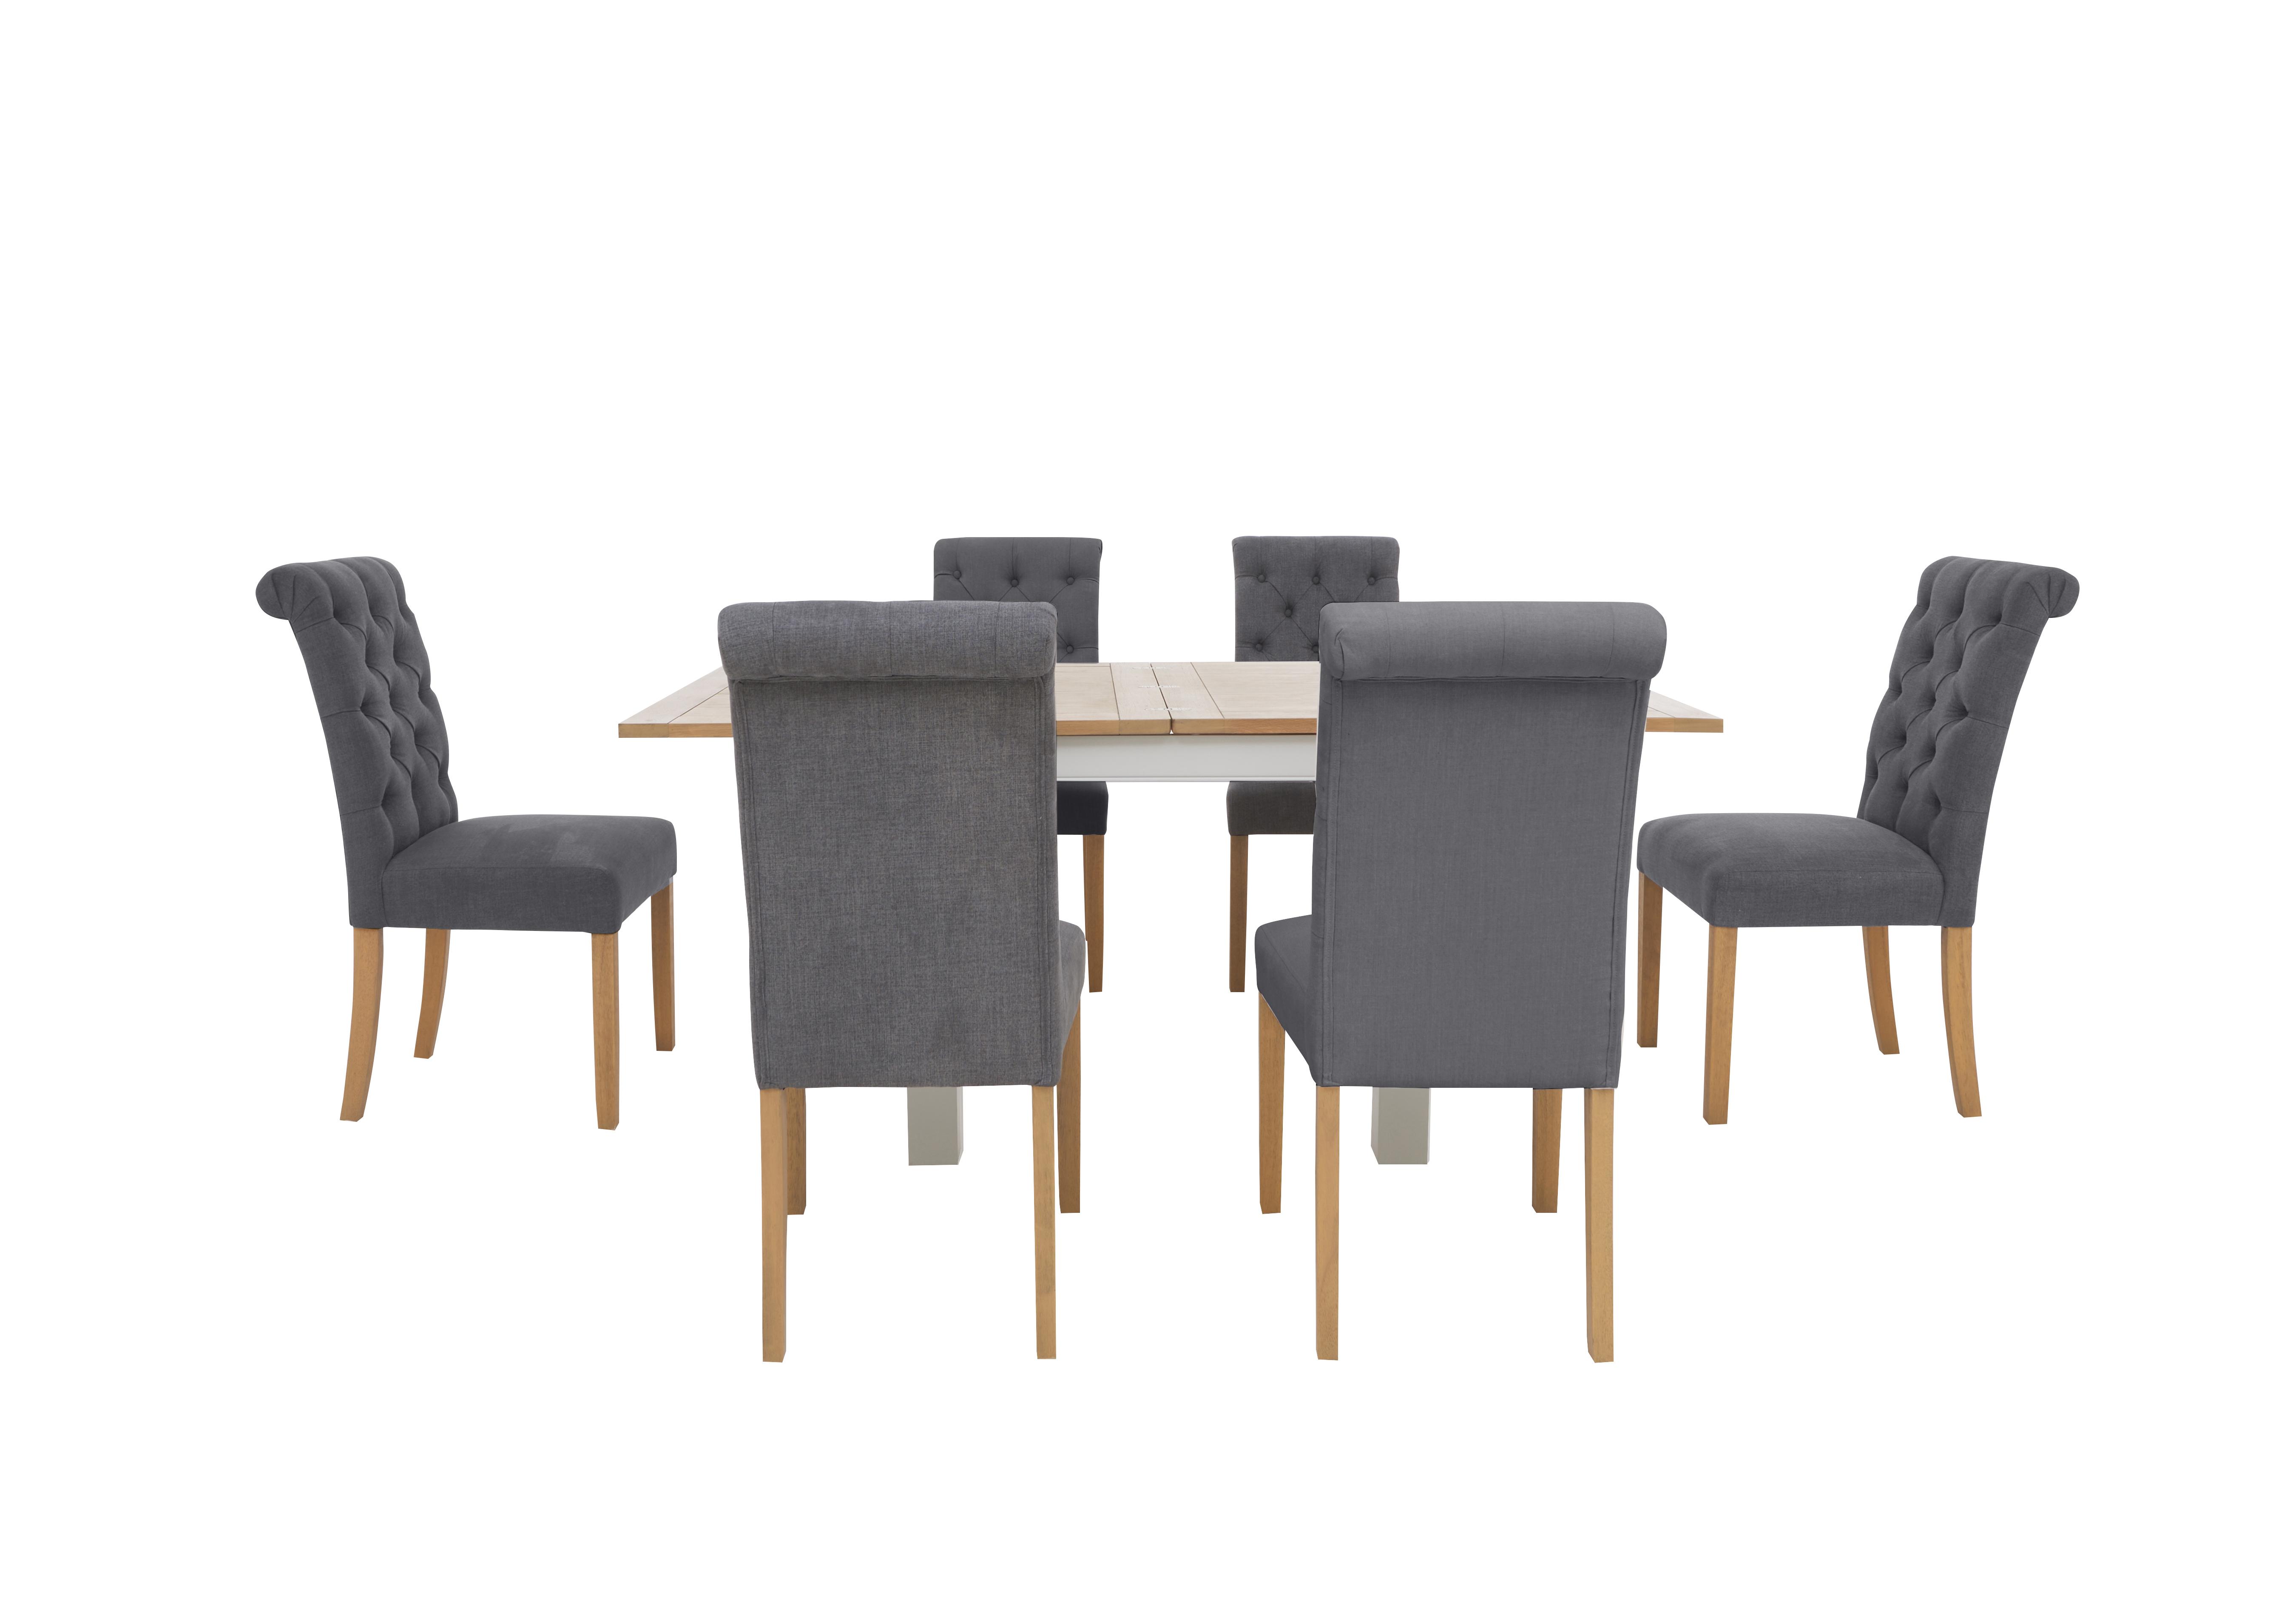 Hamilton Flip Top Dining Table and 6 Button Back Dining Chairs in Charcoal on Furniture Village